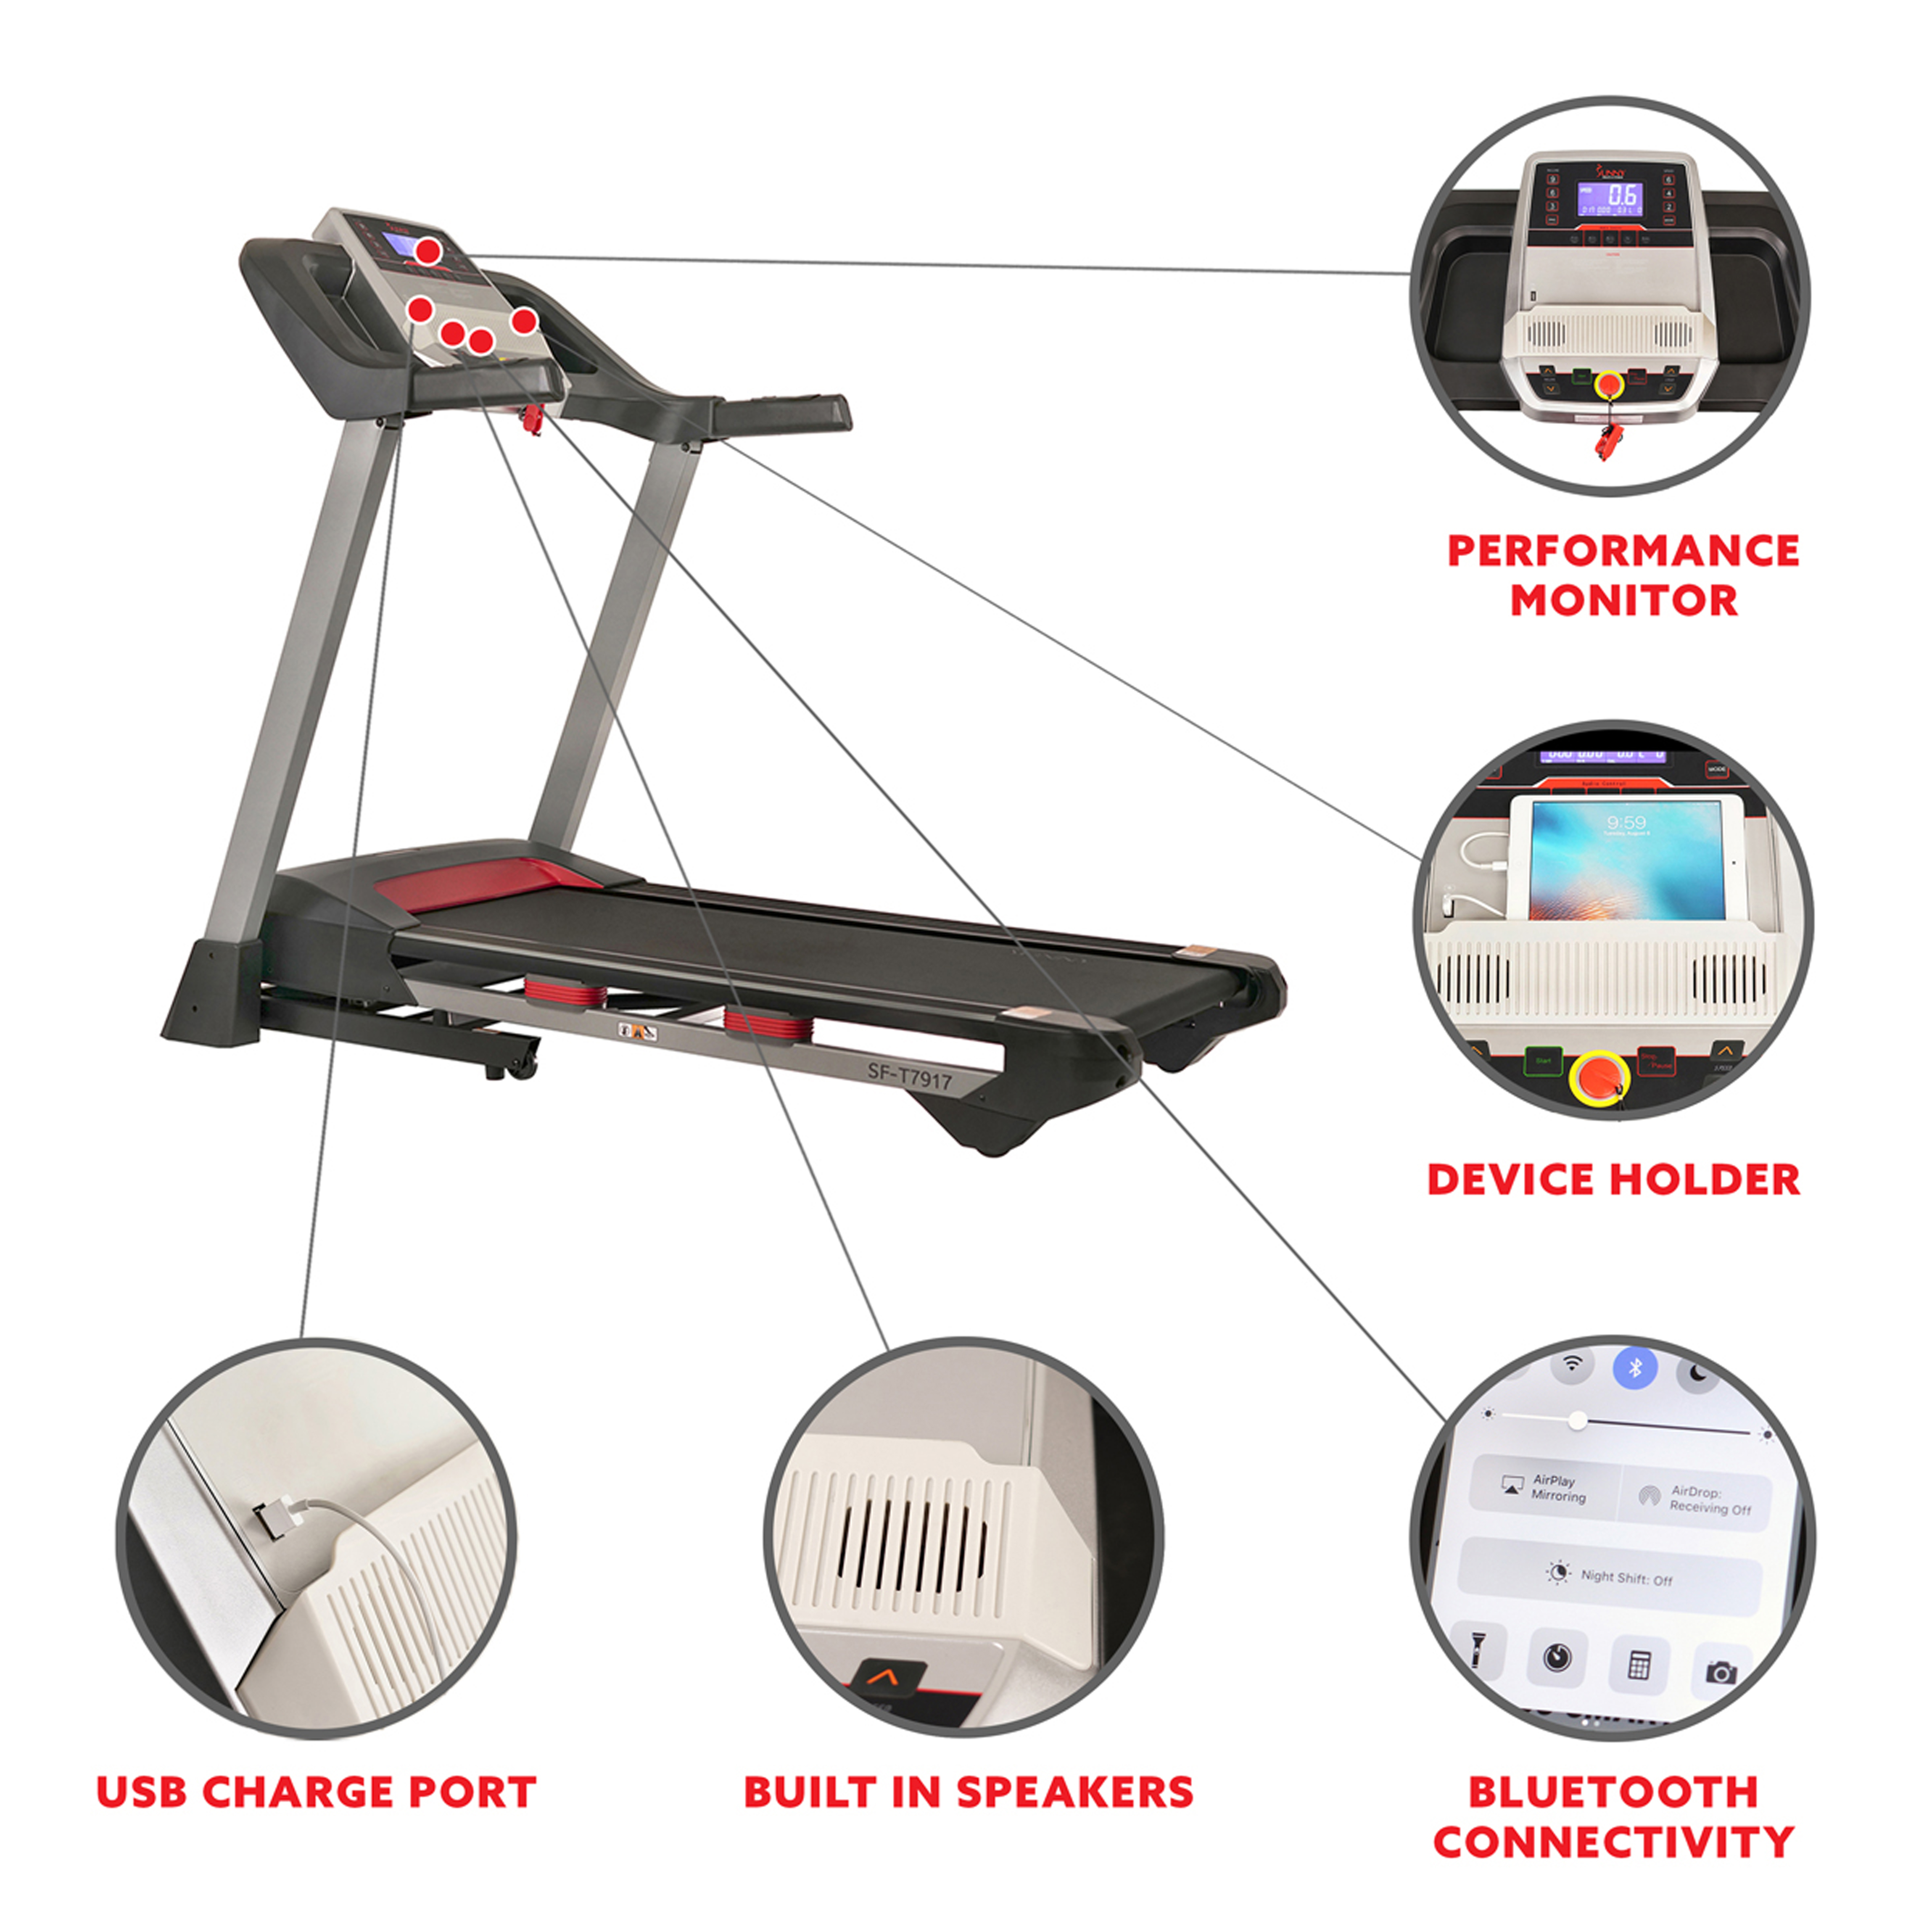 Sunny Health Fitness Electric Incline Treadmill, Bluetooth Speakers, USB Charge Function, Home Workout Exercise Machine, SF-T7917 - image 3 of 13